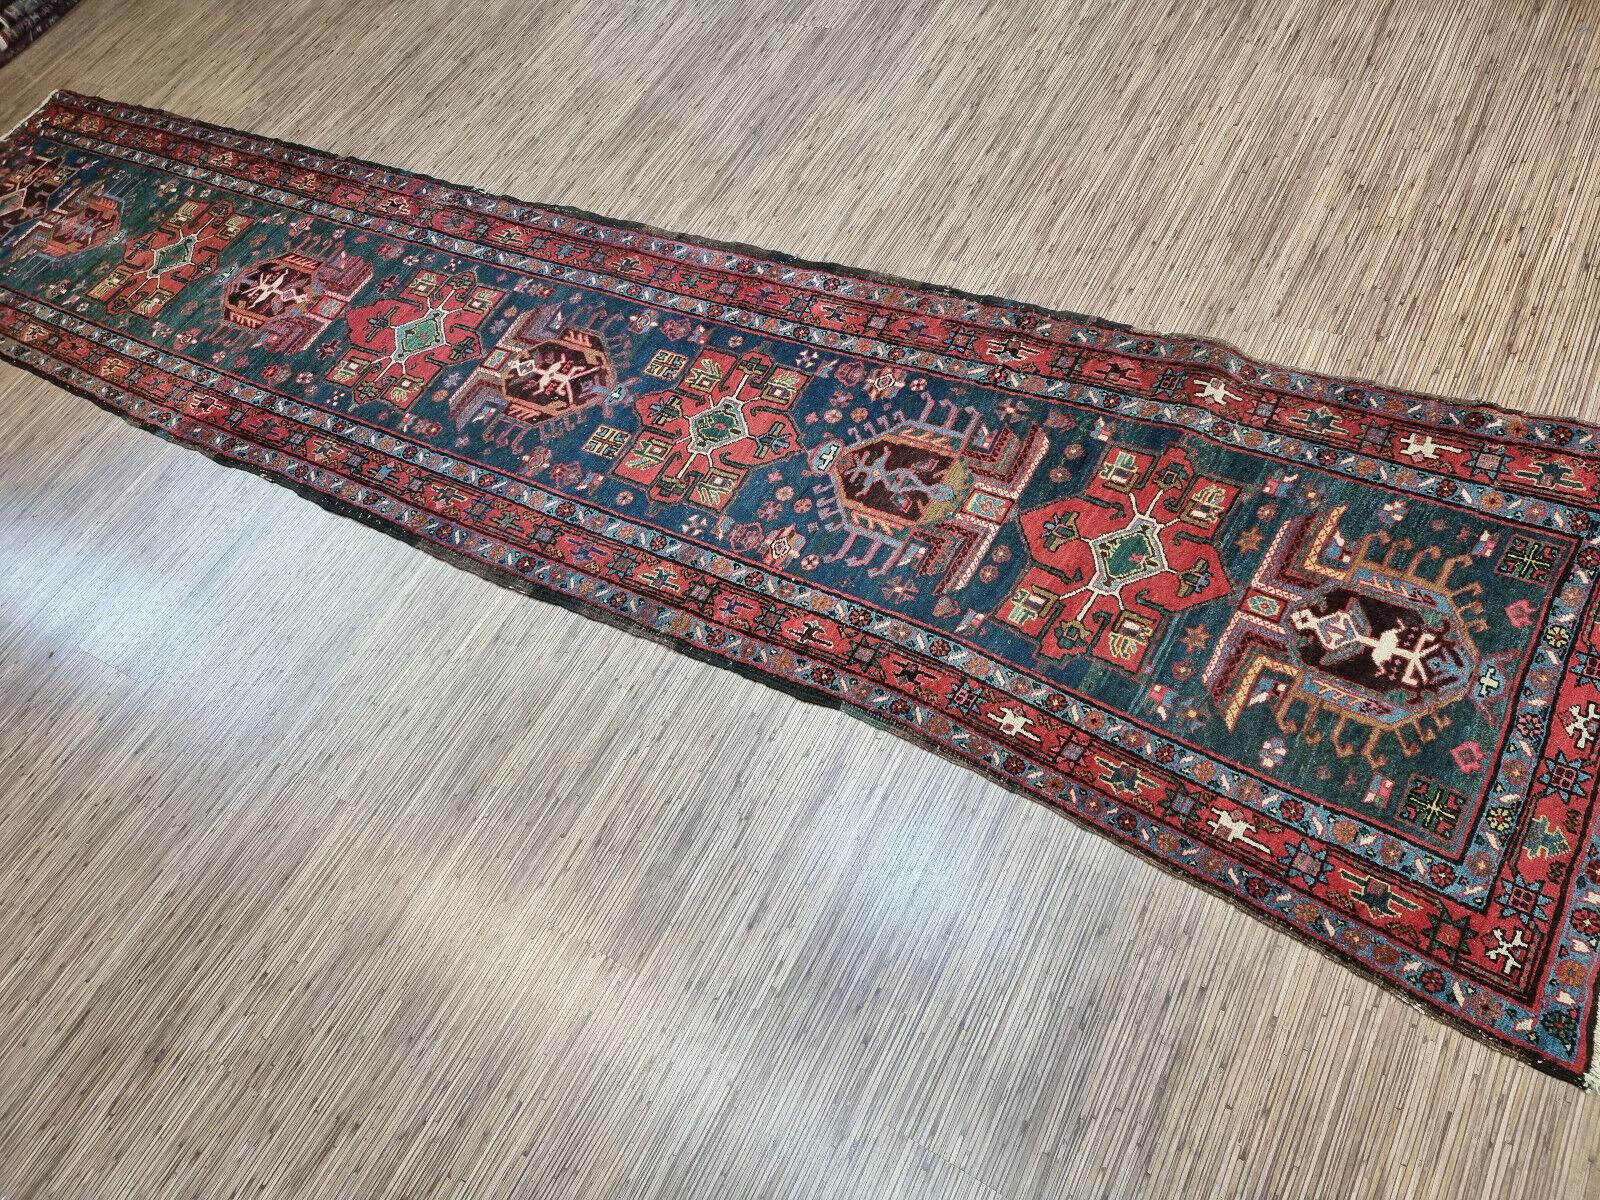 Bring home a piece of history and artistry with this Handmade Antique Persian Style Heriz Runner Rug. This beautiful rug measures 2.8’ x 13.7’ (86cm x 420cm) and dates back to the 1900s, making it a rare and valuable find. It is crafted from